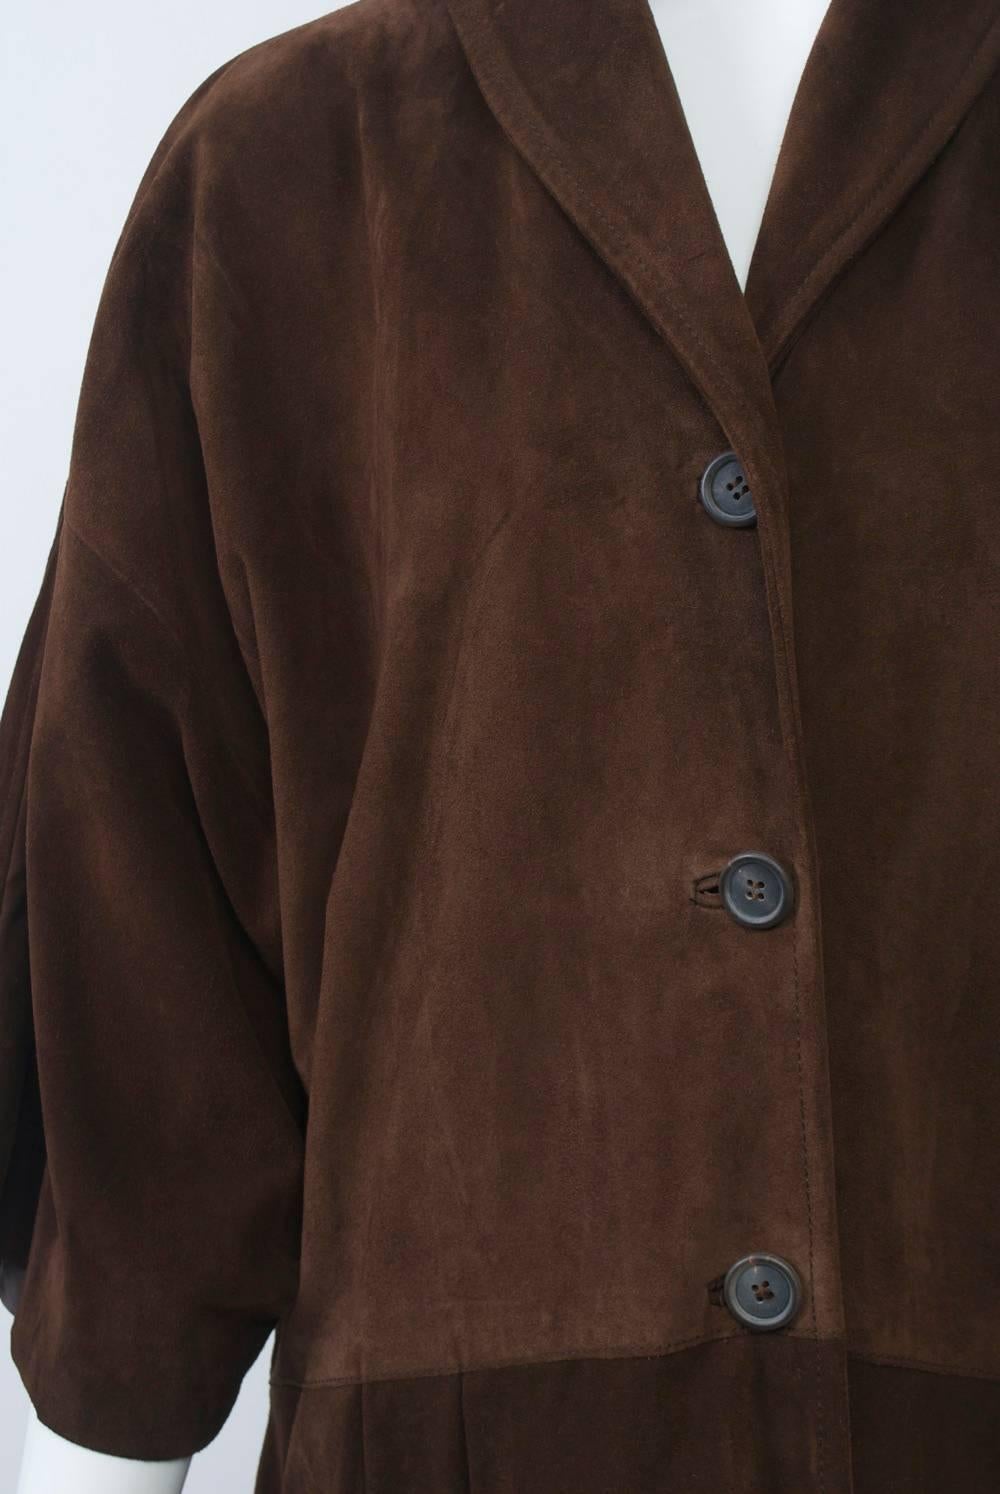 Miu Miu brown suede coat, single breasted, featuring a shallow shawl collar and dropped shoulders with wide three-quarter sleeves. Seaming at the hips above a  skirt with widely spaced pleats. Bound buttonholes. Labeled size L, but more like a size